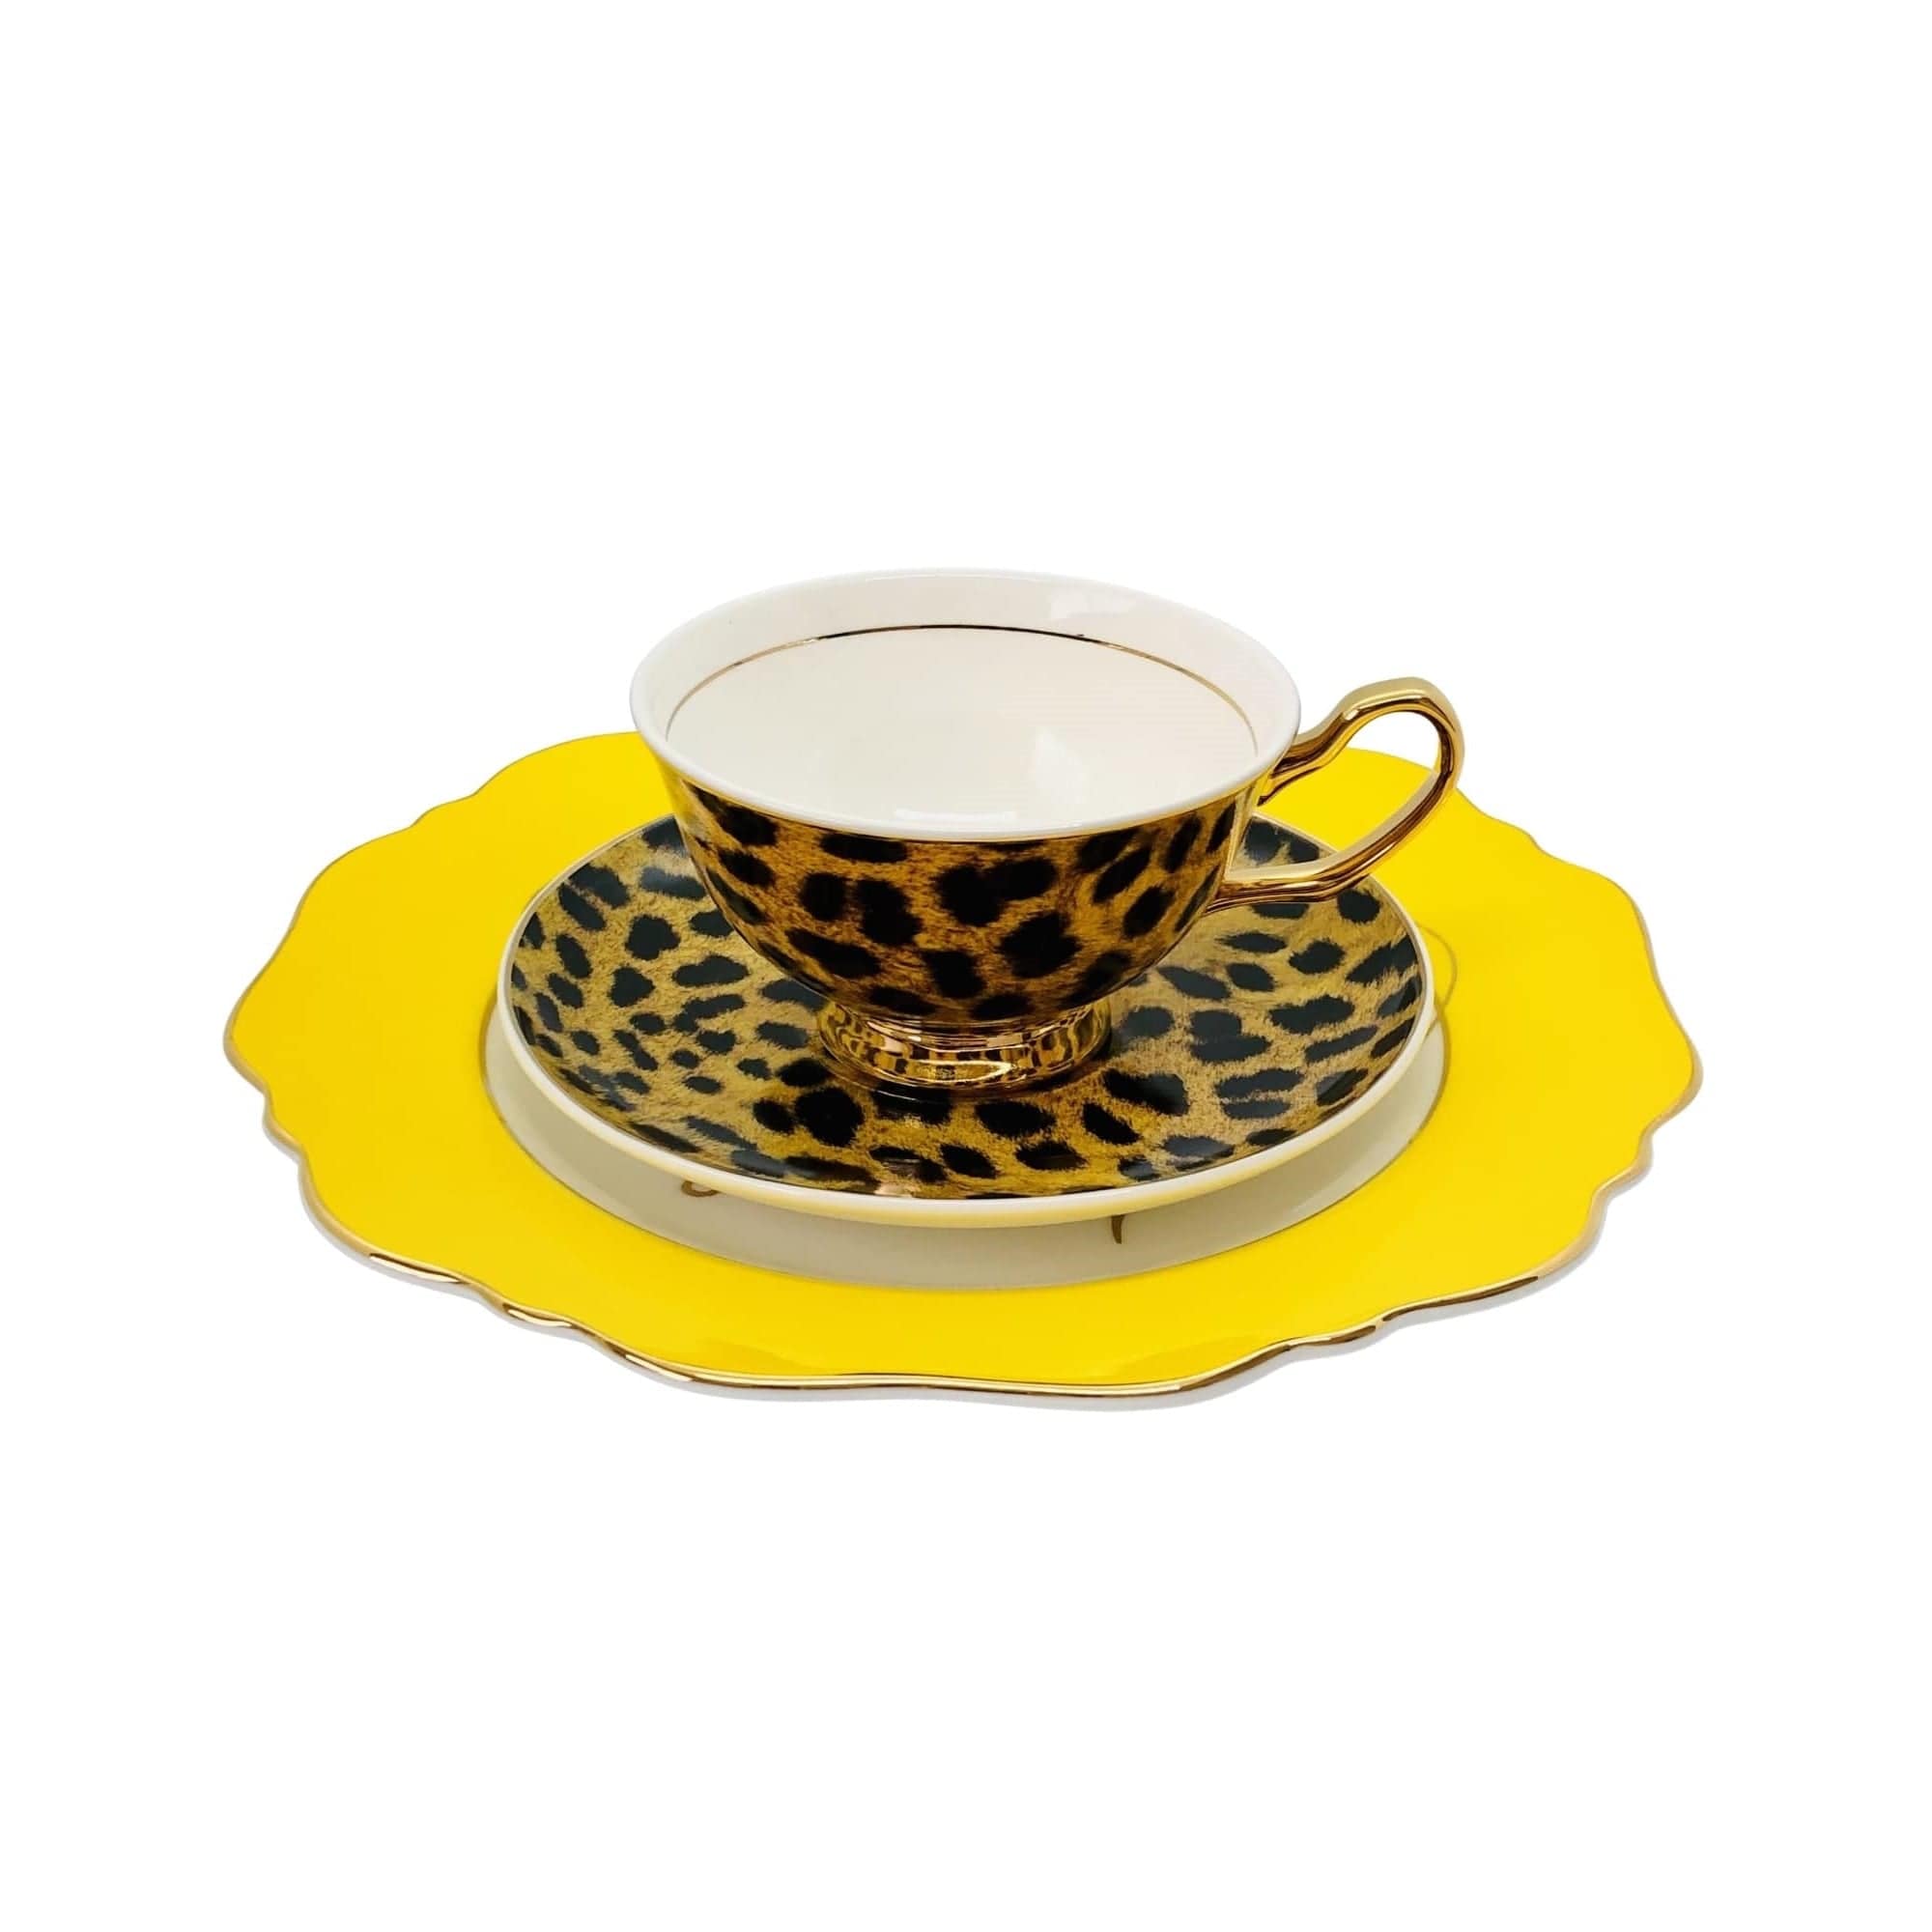 Beautifully Gifted TEAWARE LEOPARD PRINT TEACUP and SAUCER - 250ML